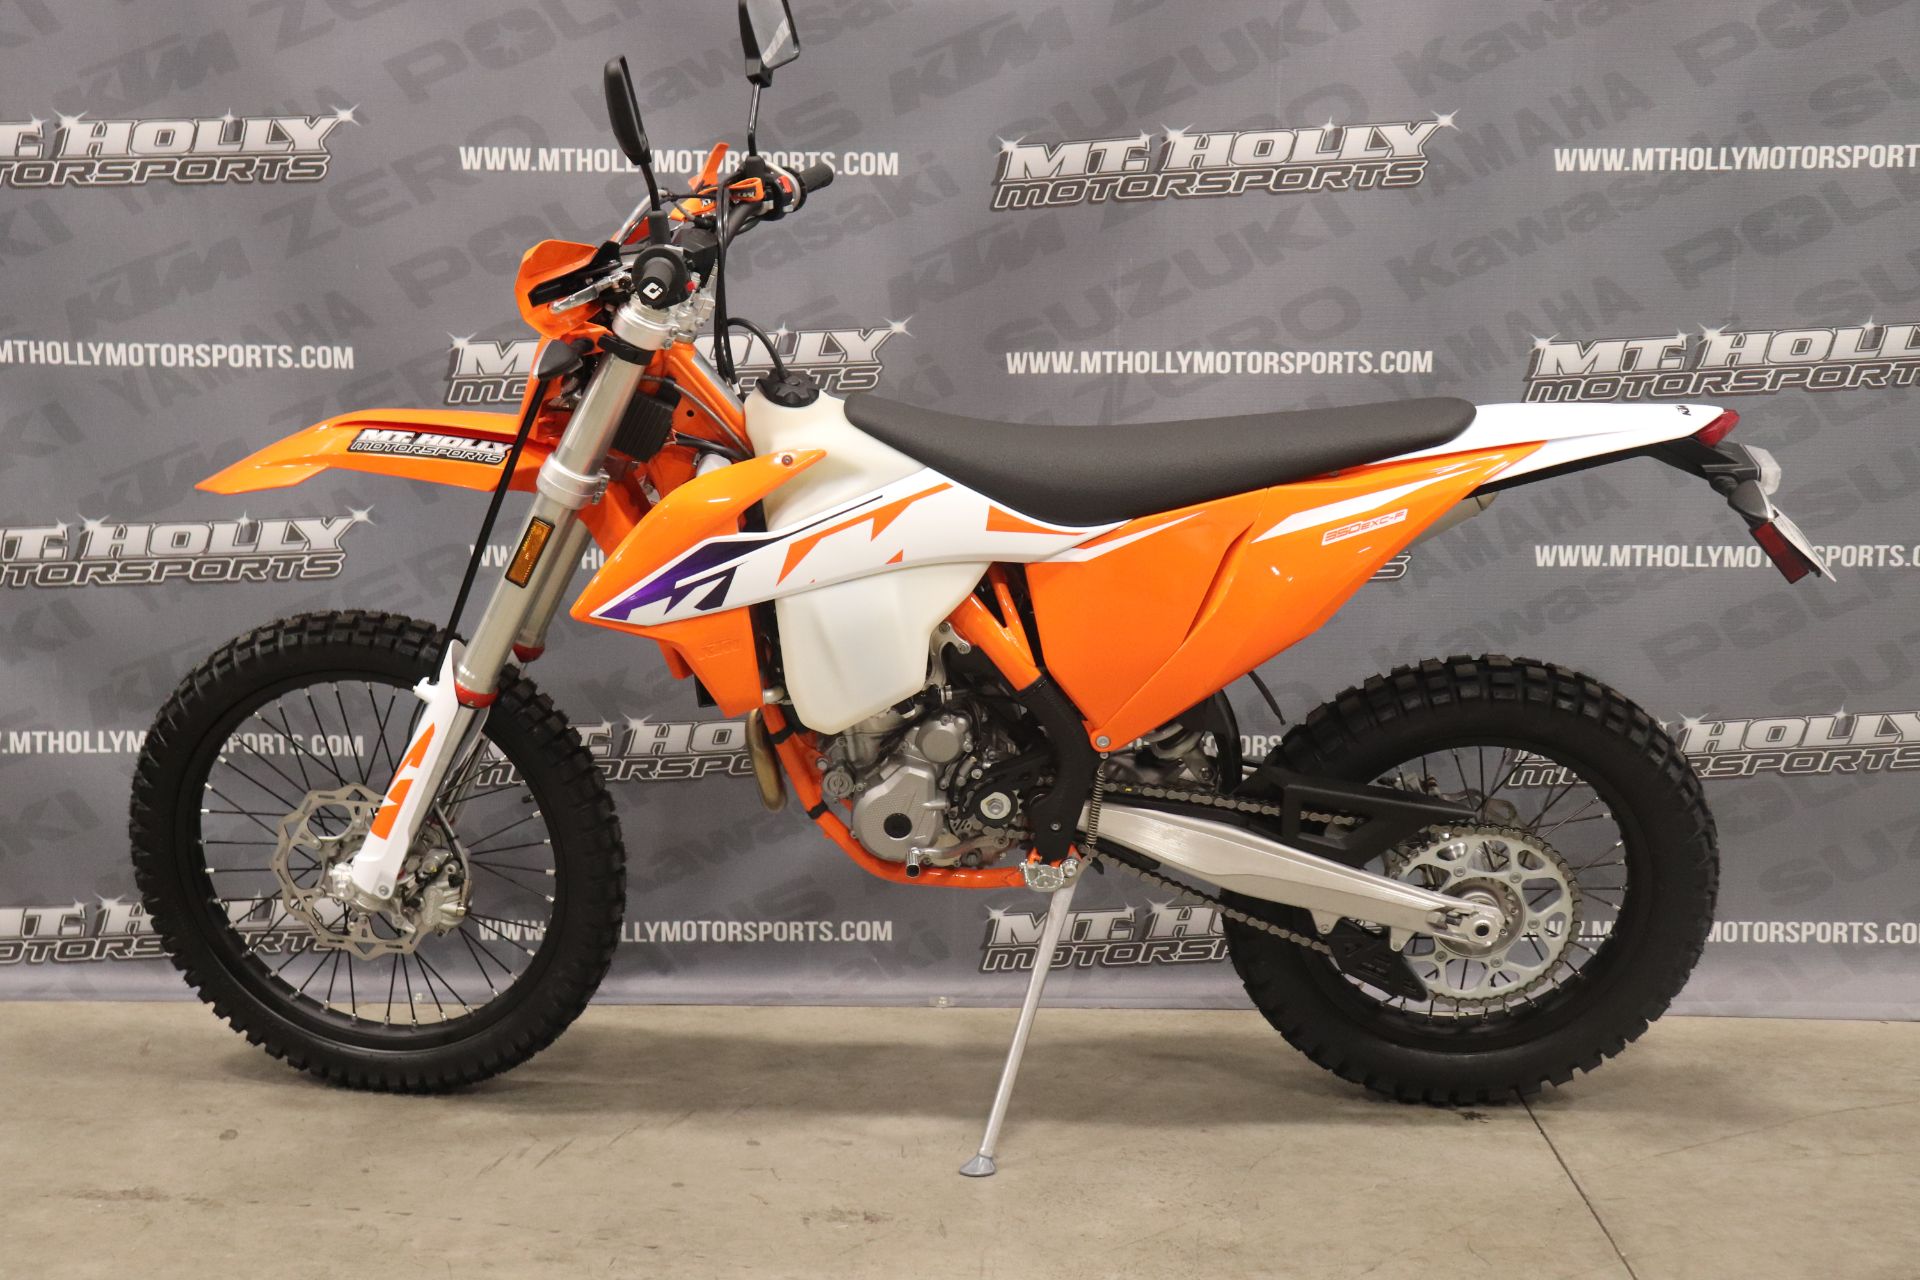 2023 KTM 350 EXC-F in Vincentown, New Jersey - Photo 2